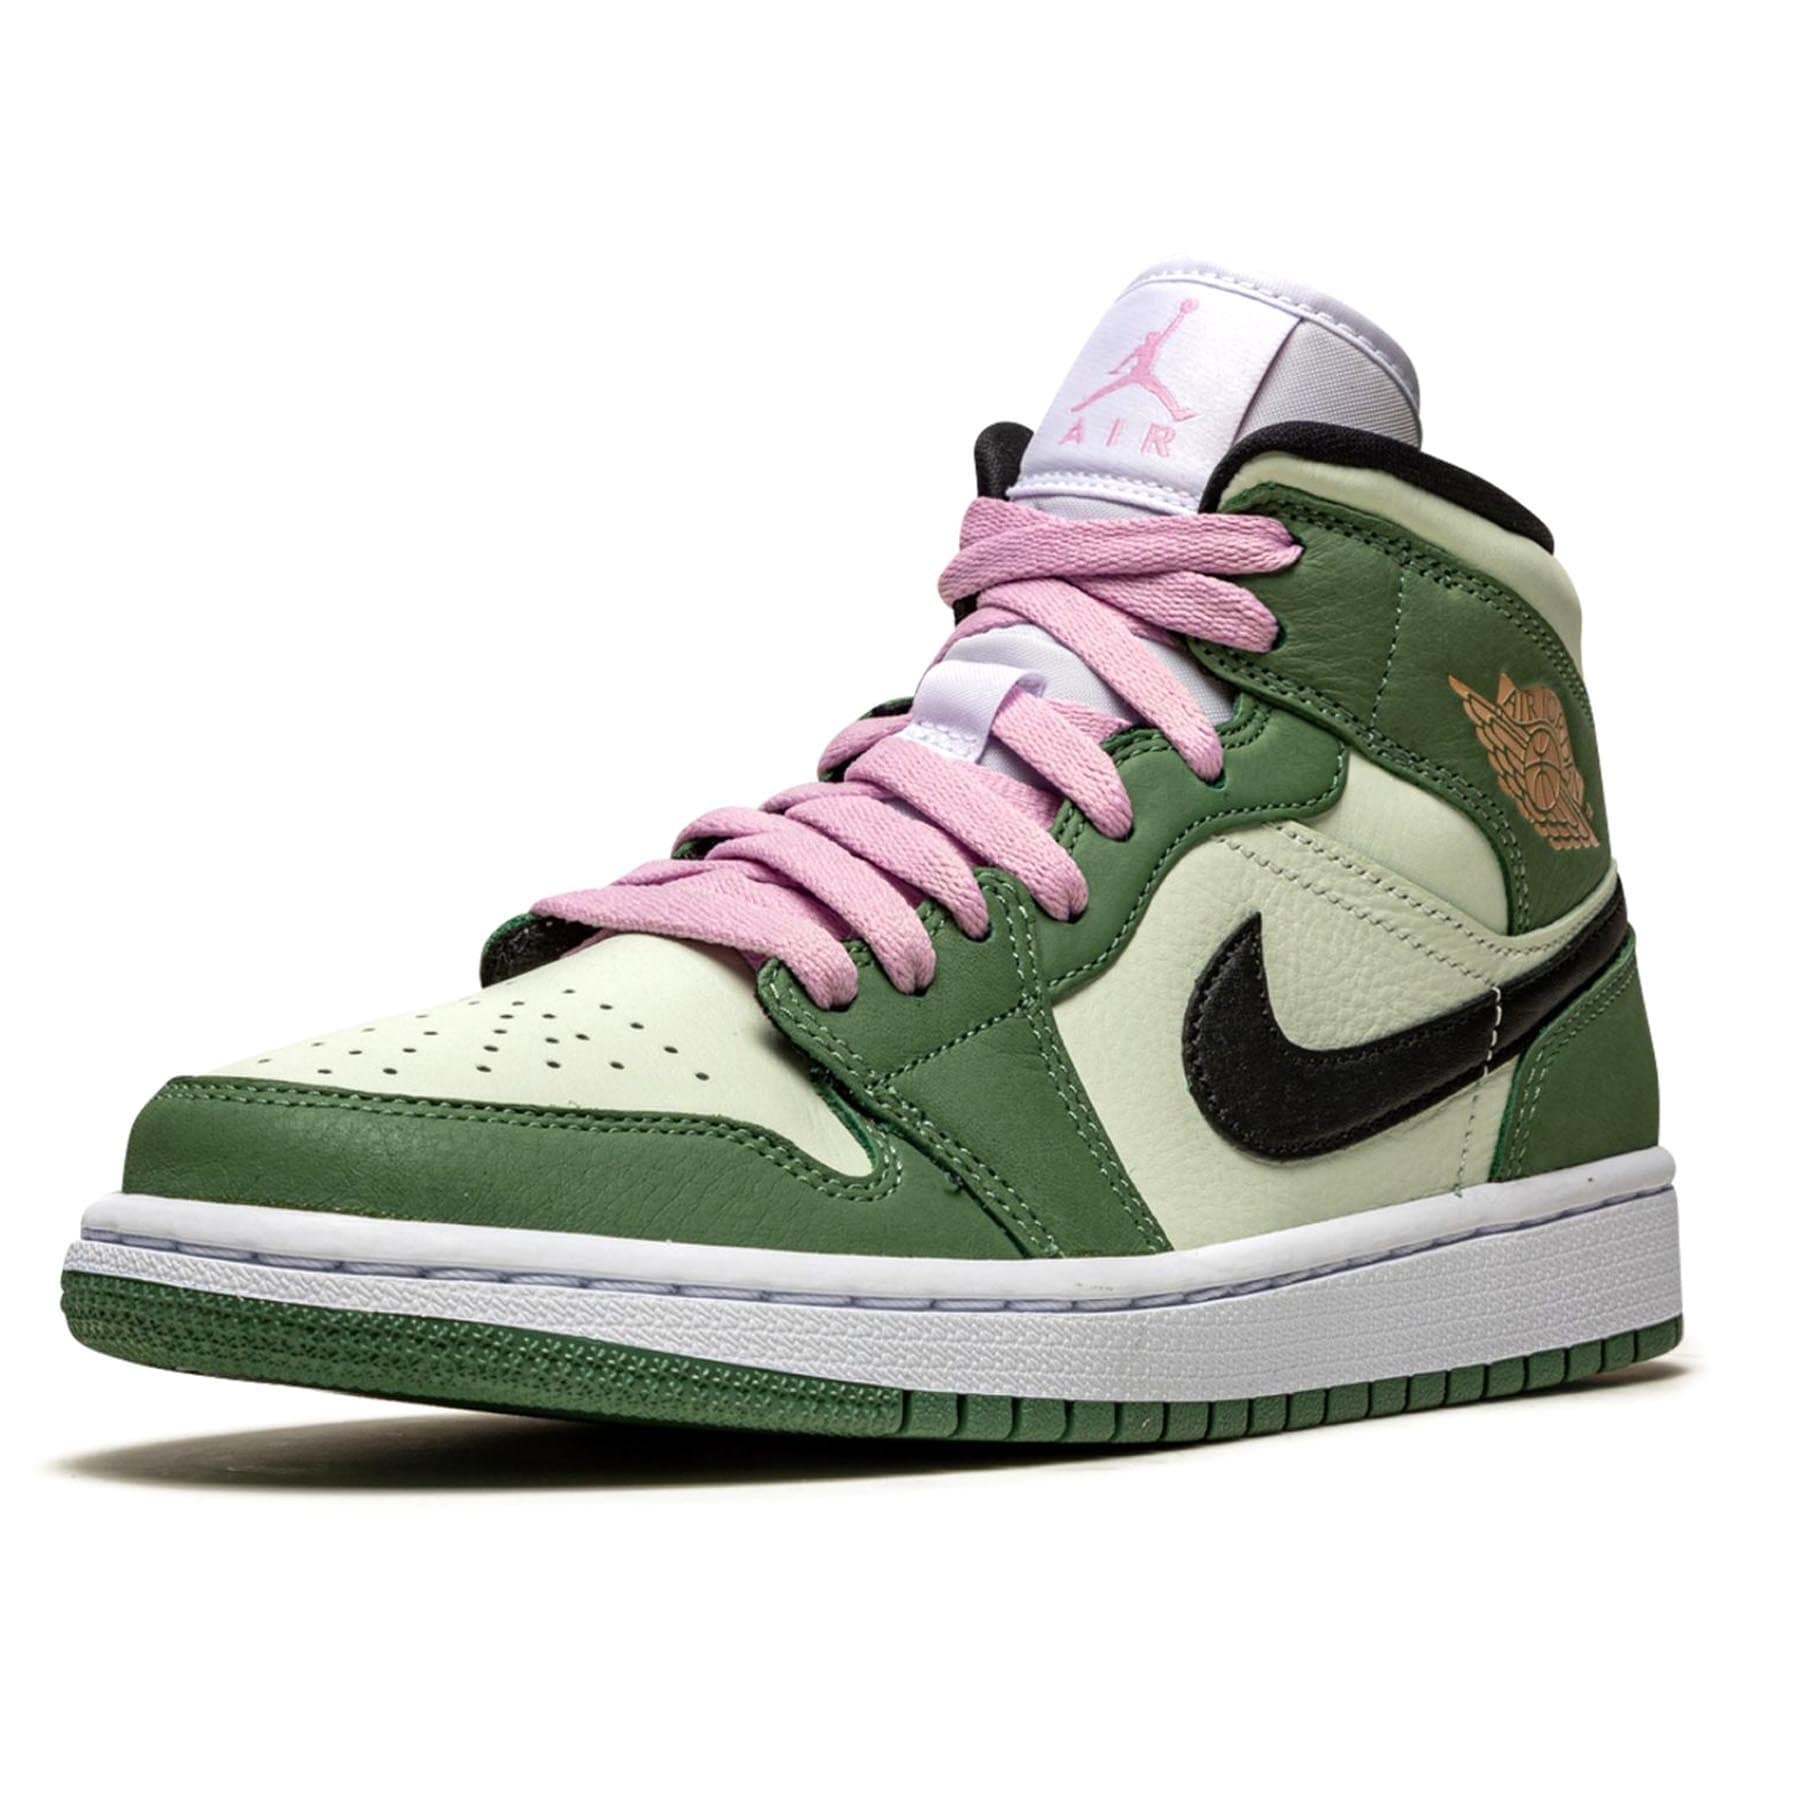 green jordan ones with pink laces